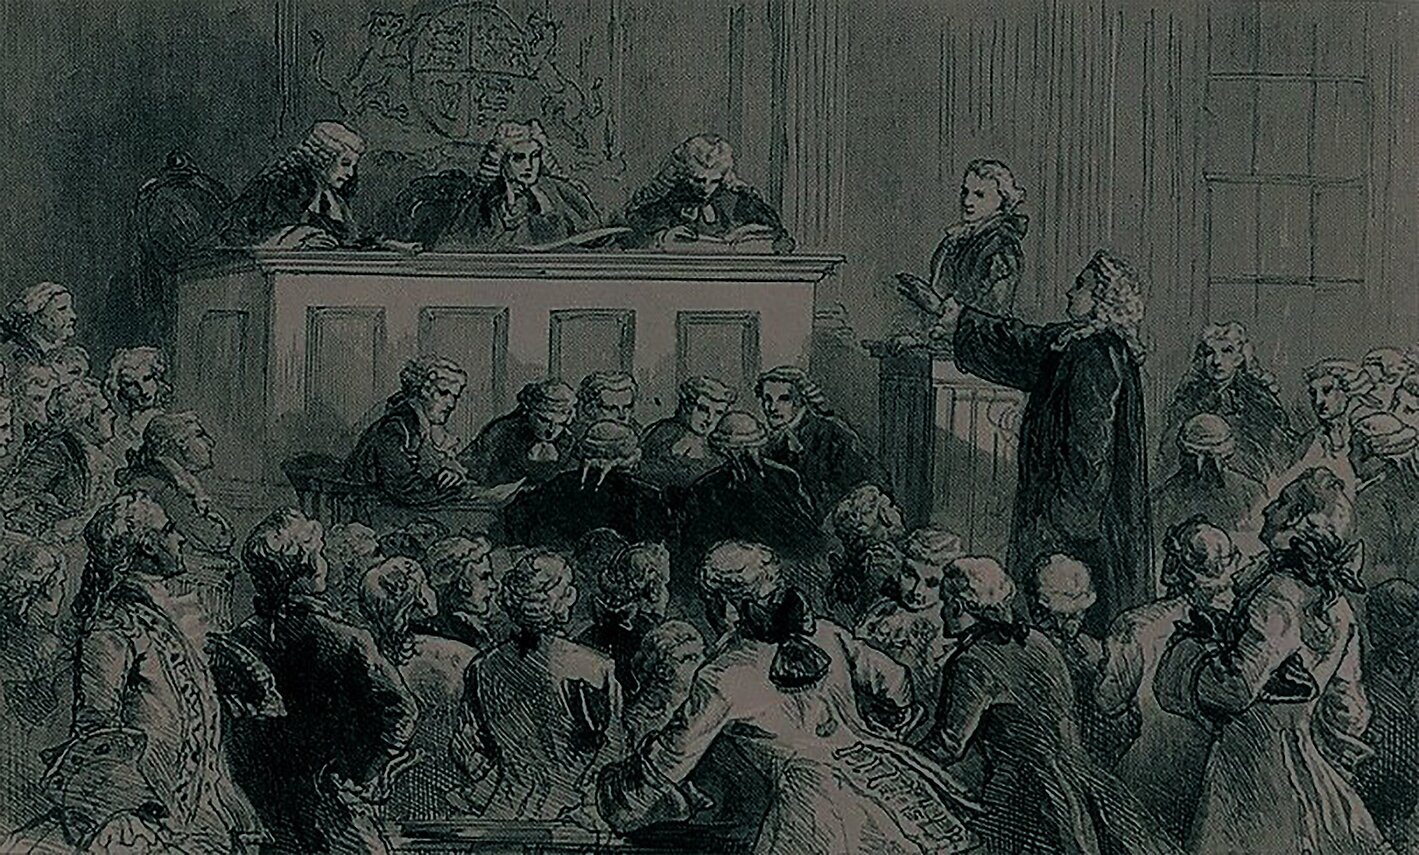 Drawing of Crown v Zenger trial